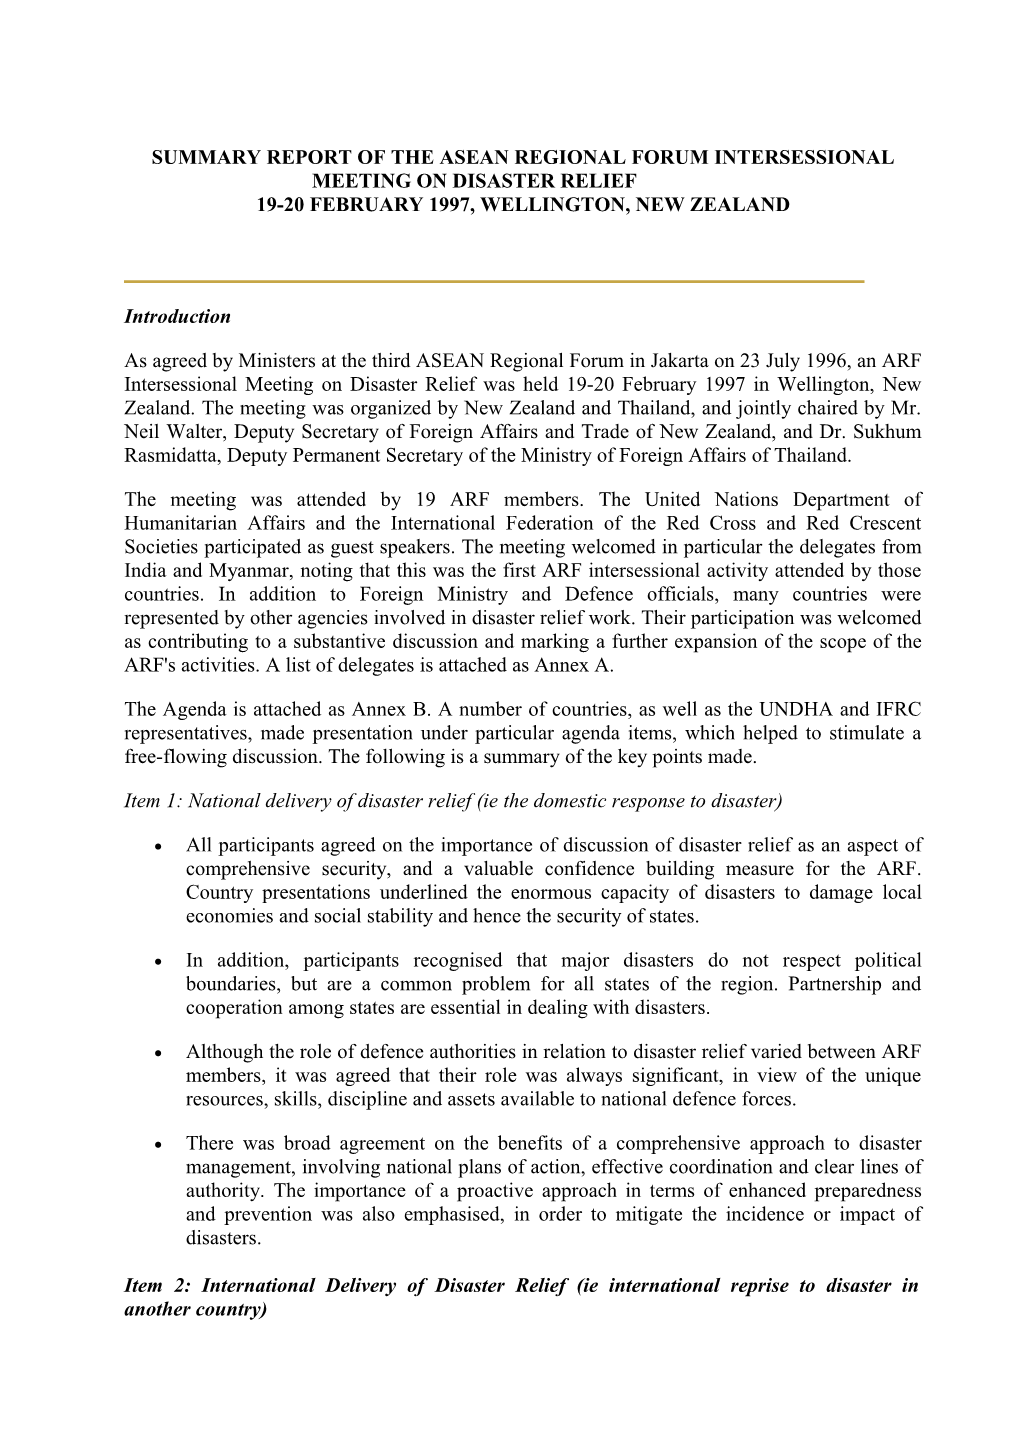 Summary Report of the Asean Regional Forum Intersessional Meeting on Disaster Relief